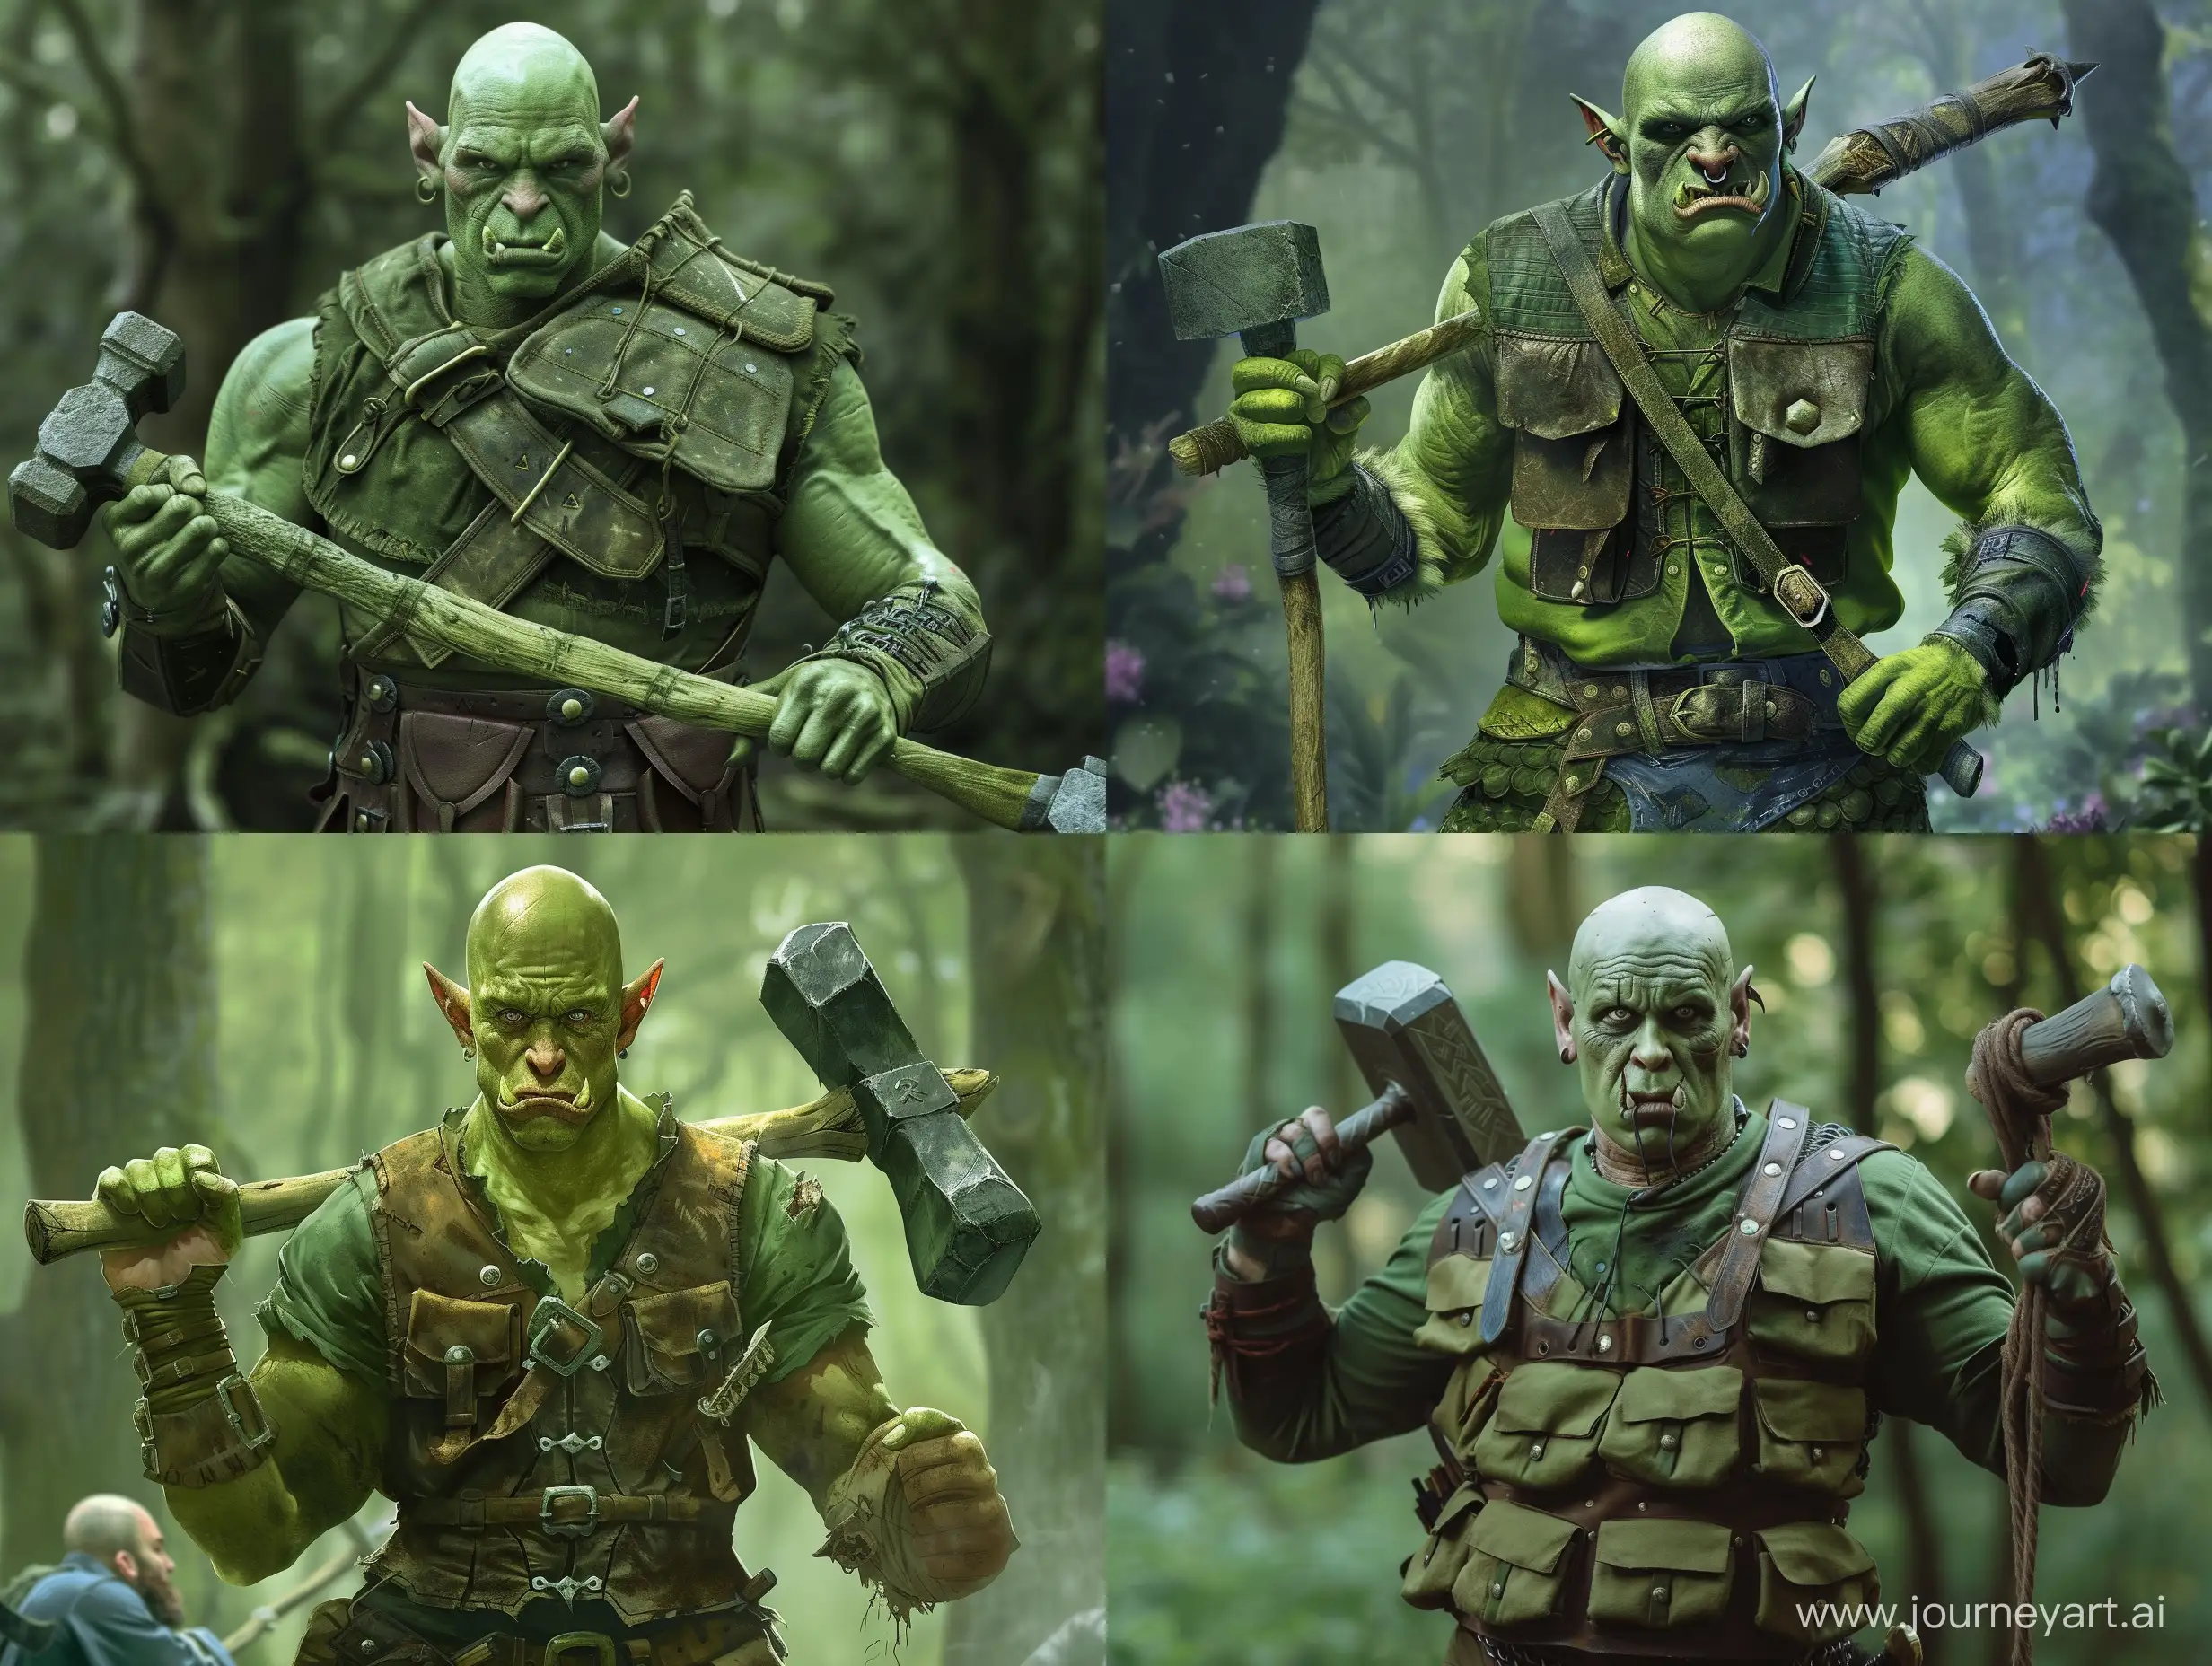 A bald orc with green skin. He's wearing a green shirt and a leather vest with lots of pockets. He holds a two-handed war hammer in his hands. He kills robbers in the forest with his two-handed hammer